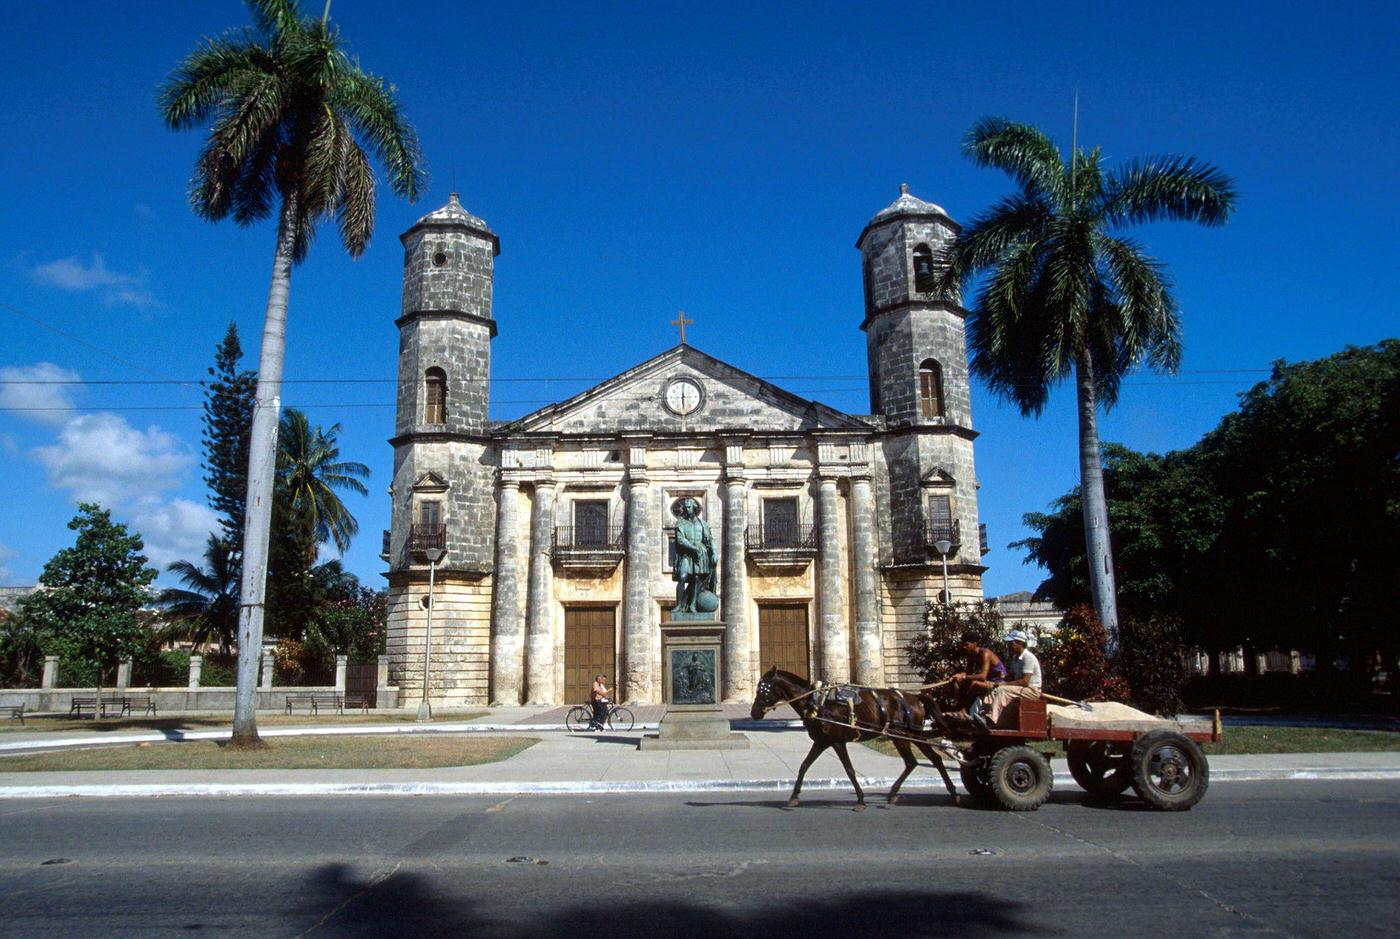 Two Cuban peasants driving a horse-drawn cart in front of the cathedral and monument in Cardenas, Cuba, 1990.